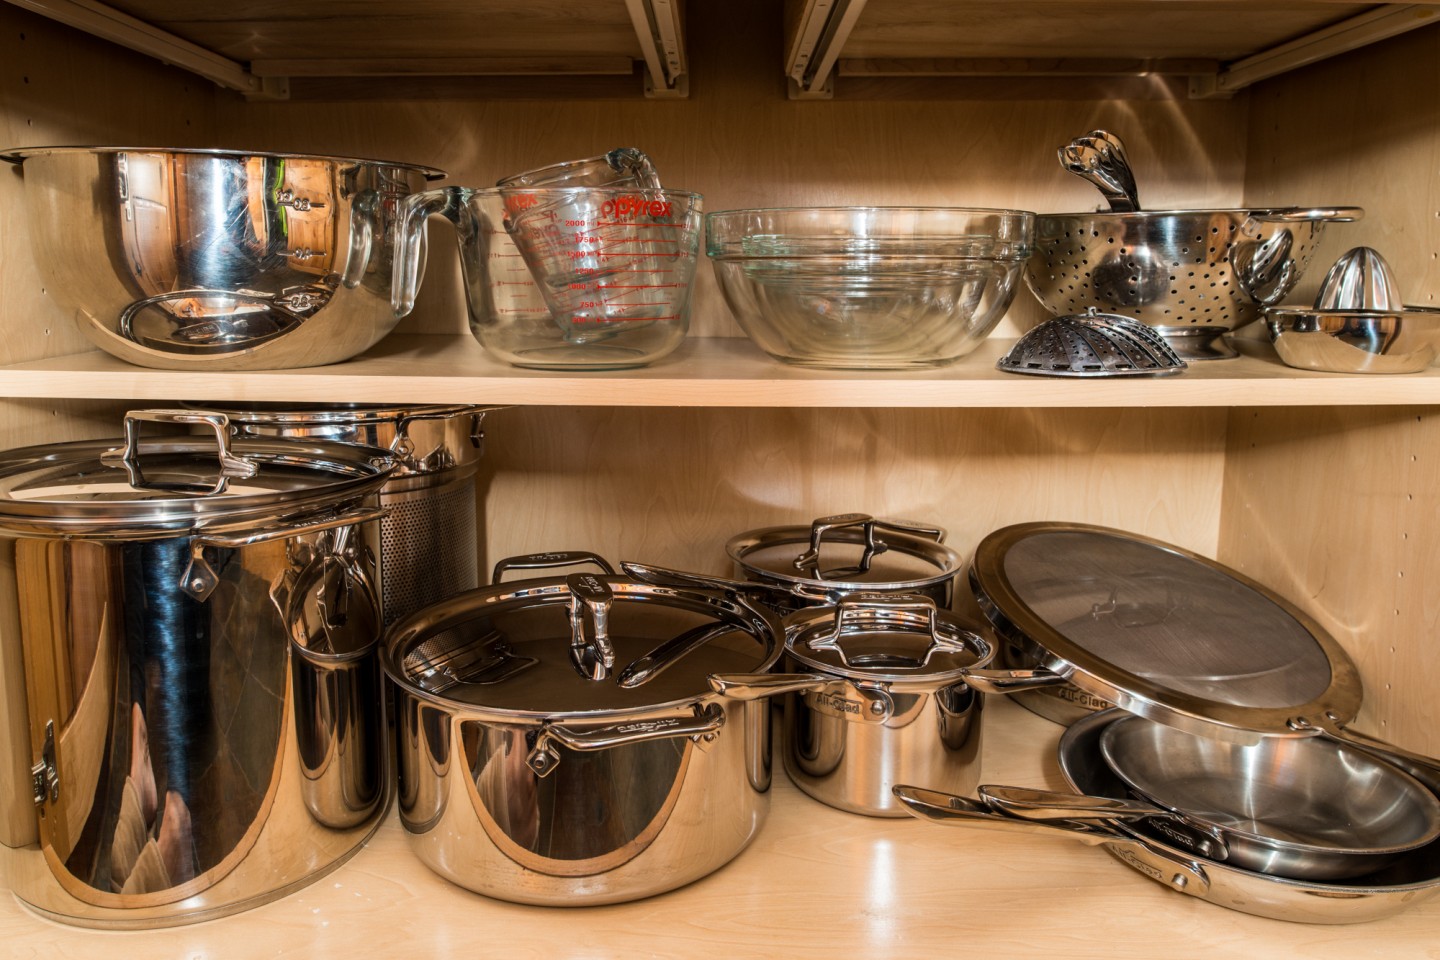 Our super cookware makes coming home to a great meal easy